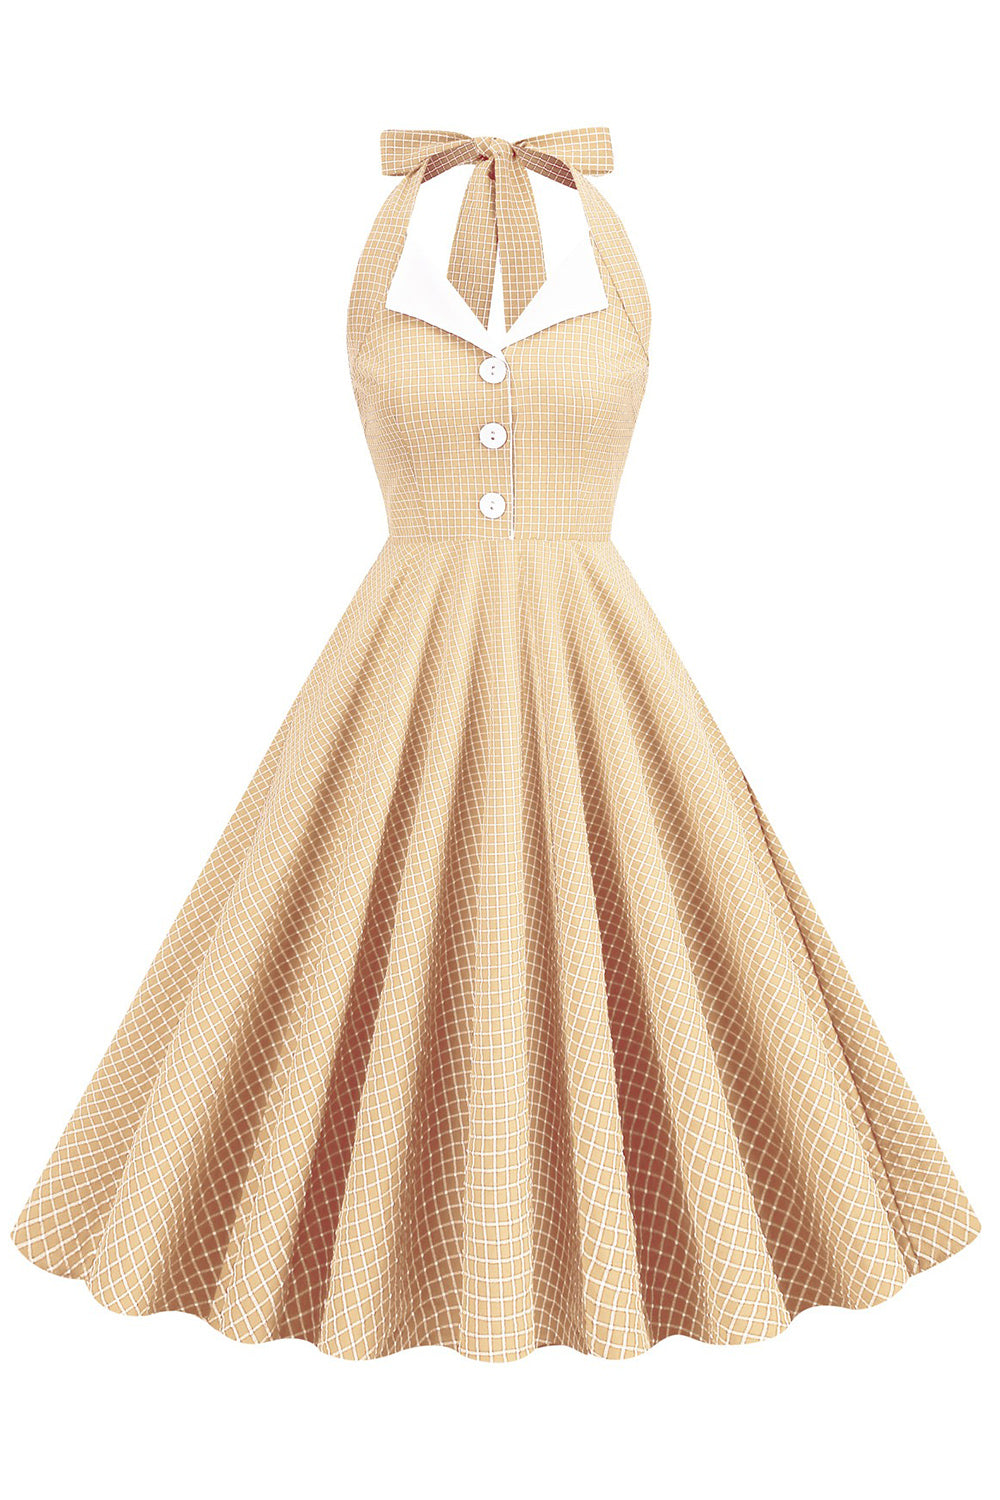 Retro Style Halter Neck Yellow 1950s Dress with Button